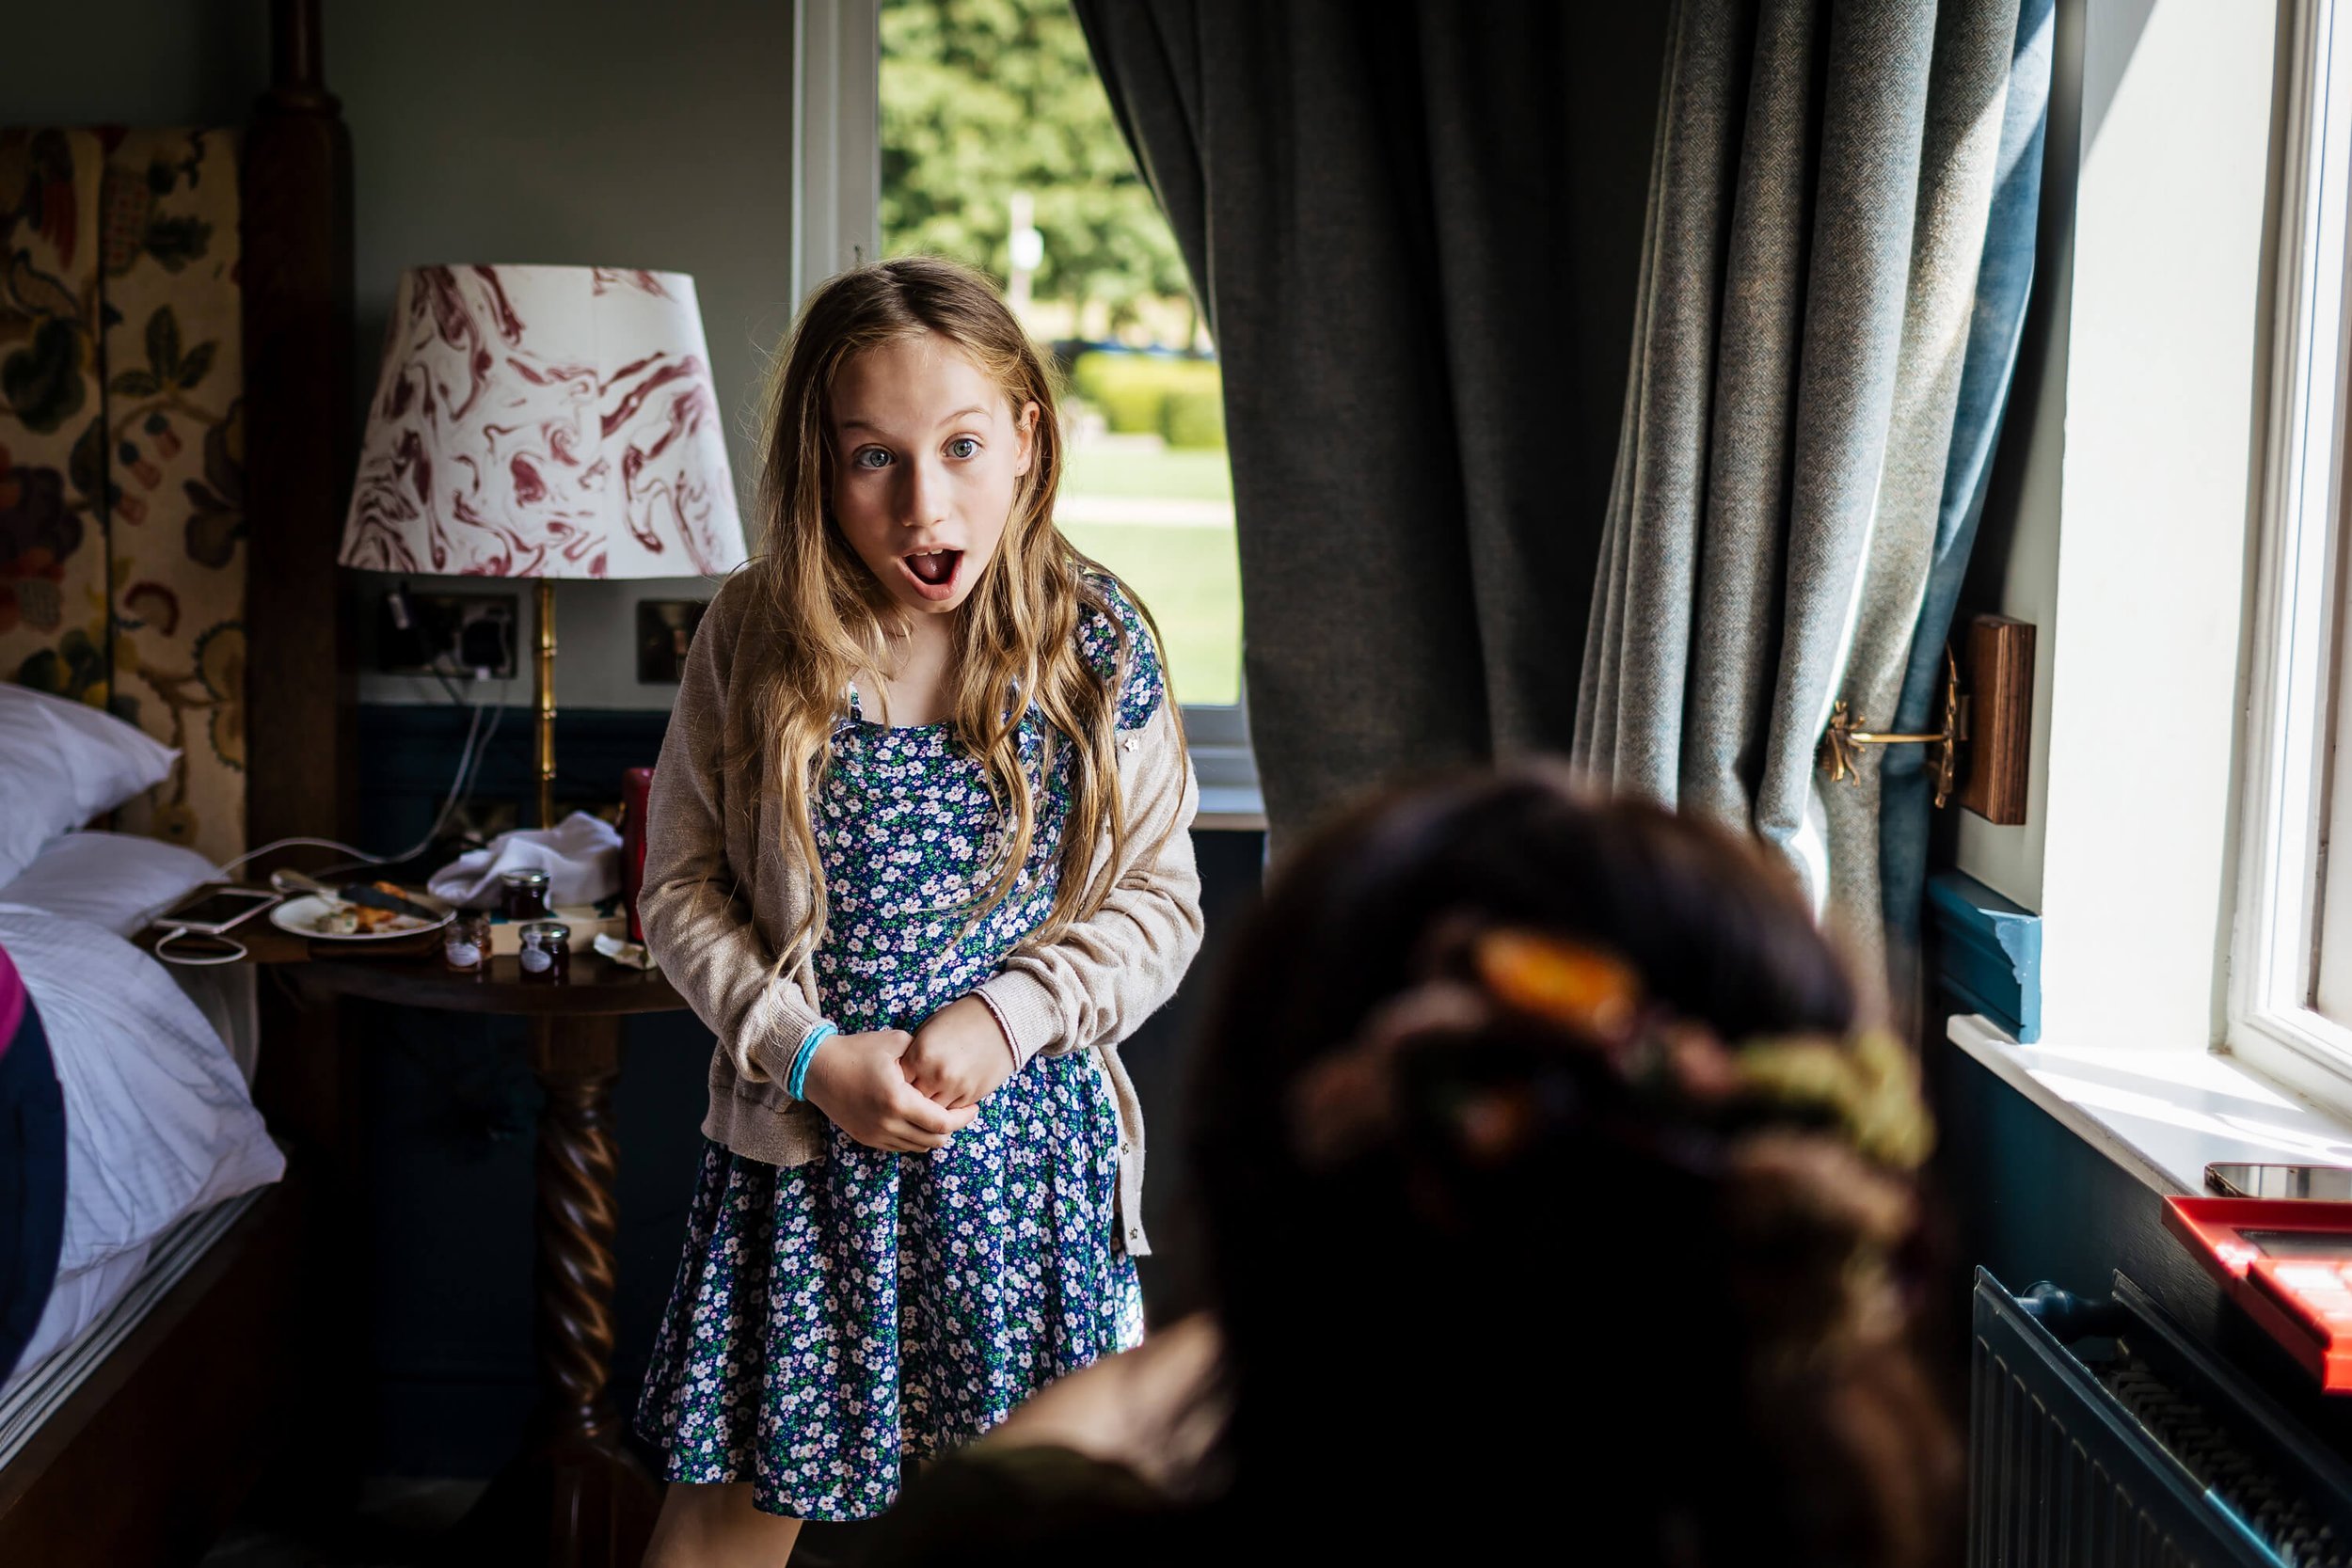 Bride's daughter looking shocked as her mum gets ready